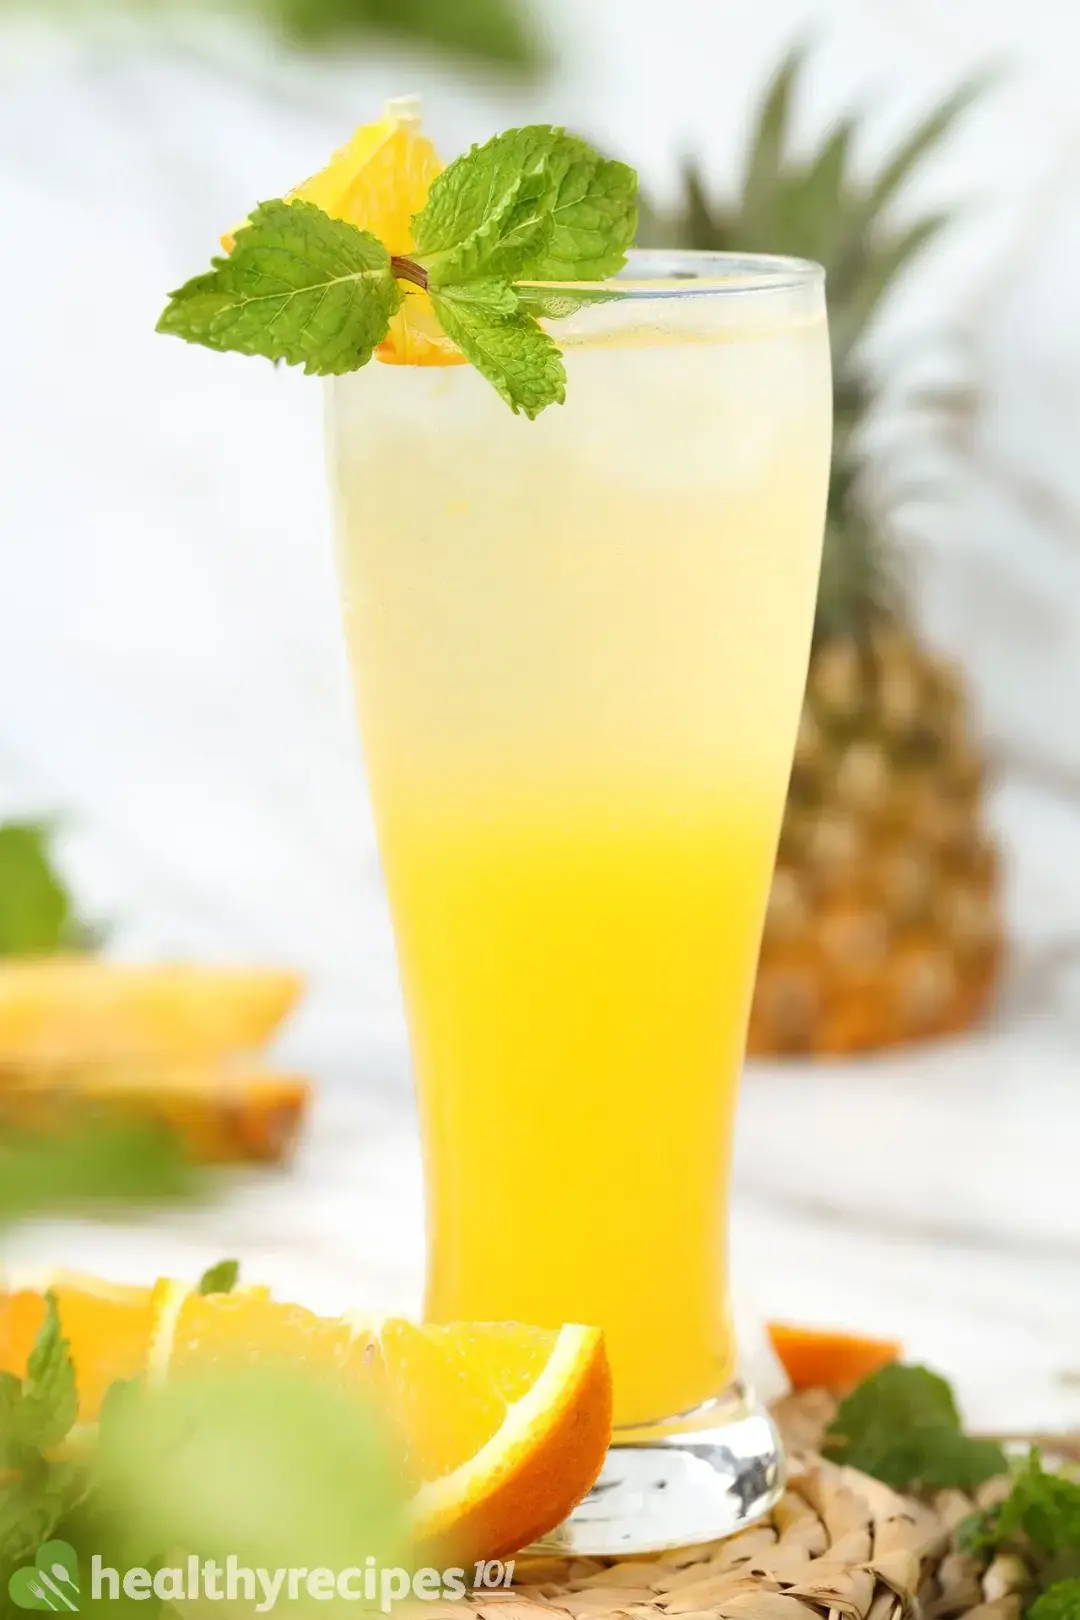 A glass of orange juice at the bottom, soda on top, garnished with orange wedges and mint sprigs